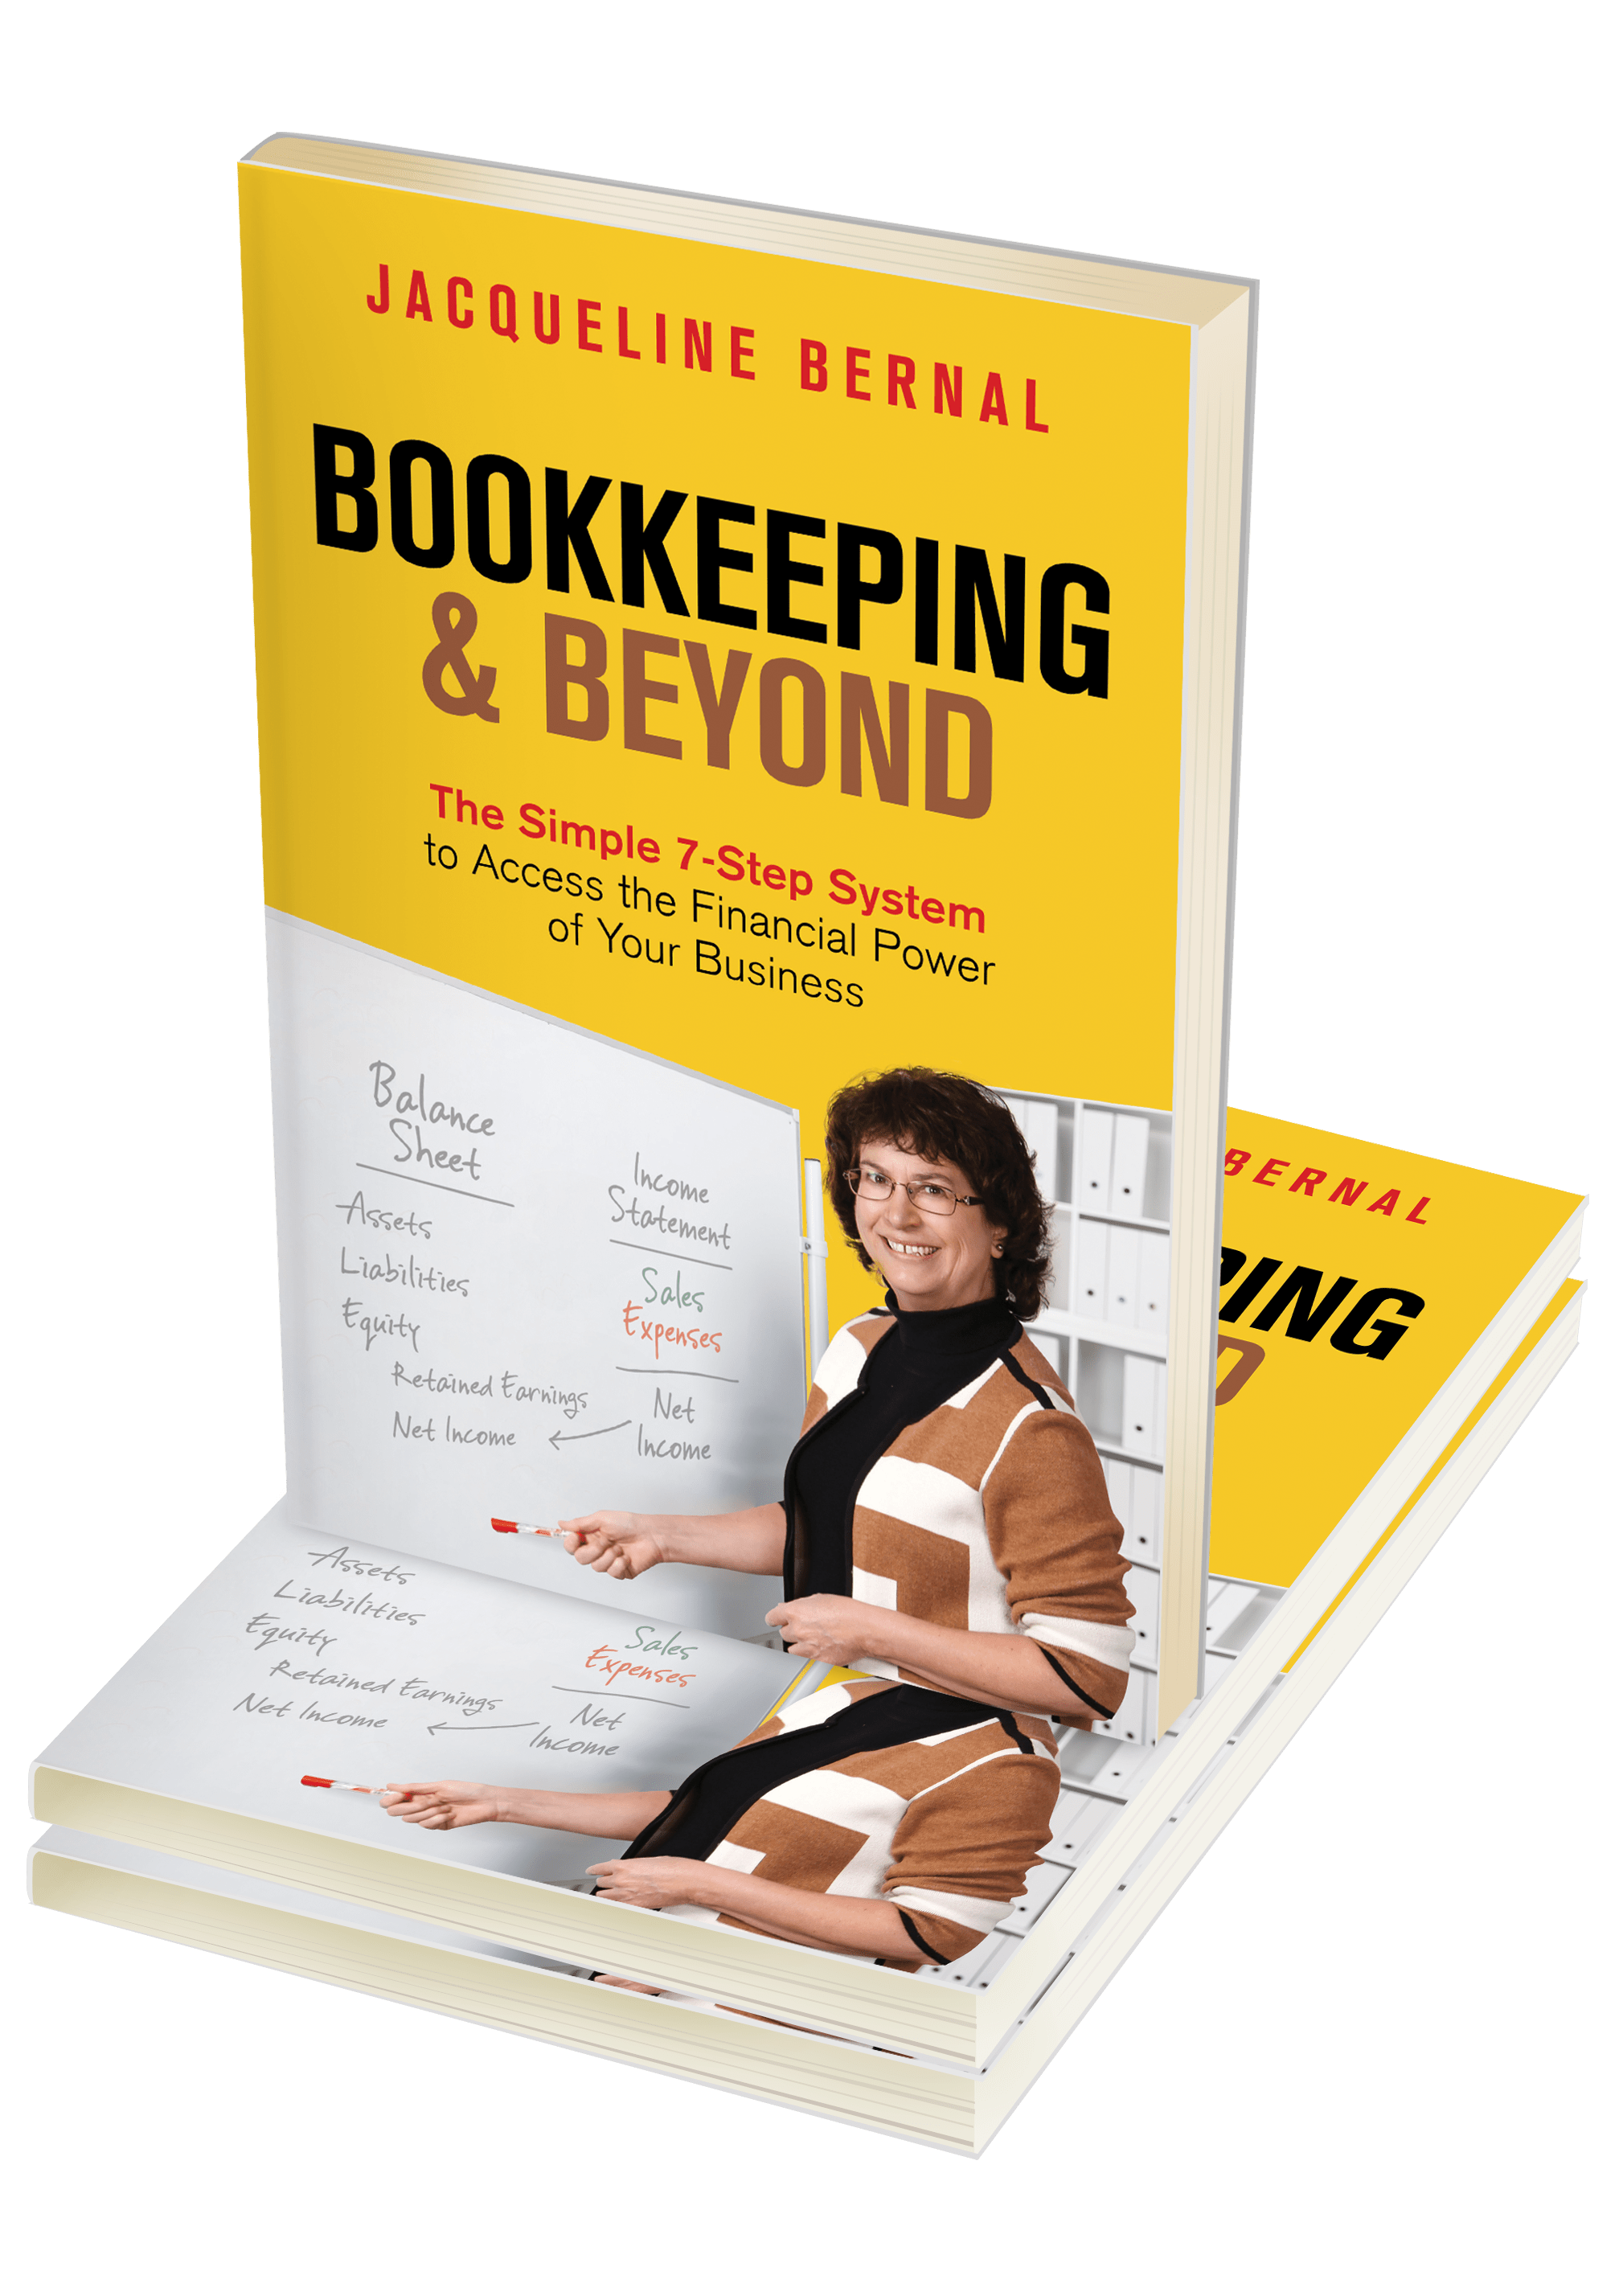 Image of the book, Bookkeeping and Beyond: The Simple 7 Step System to Access the Financial Power of Your Business.